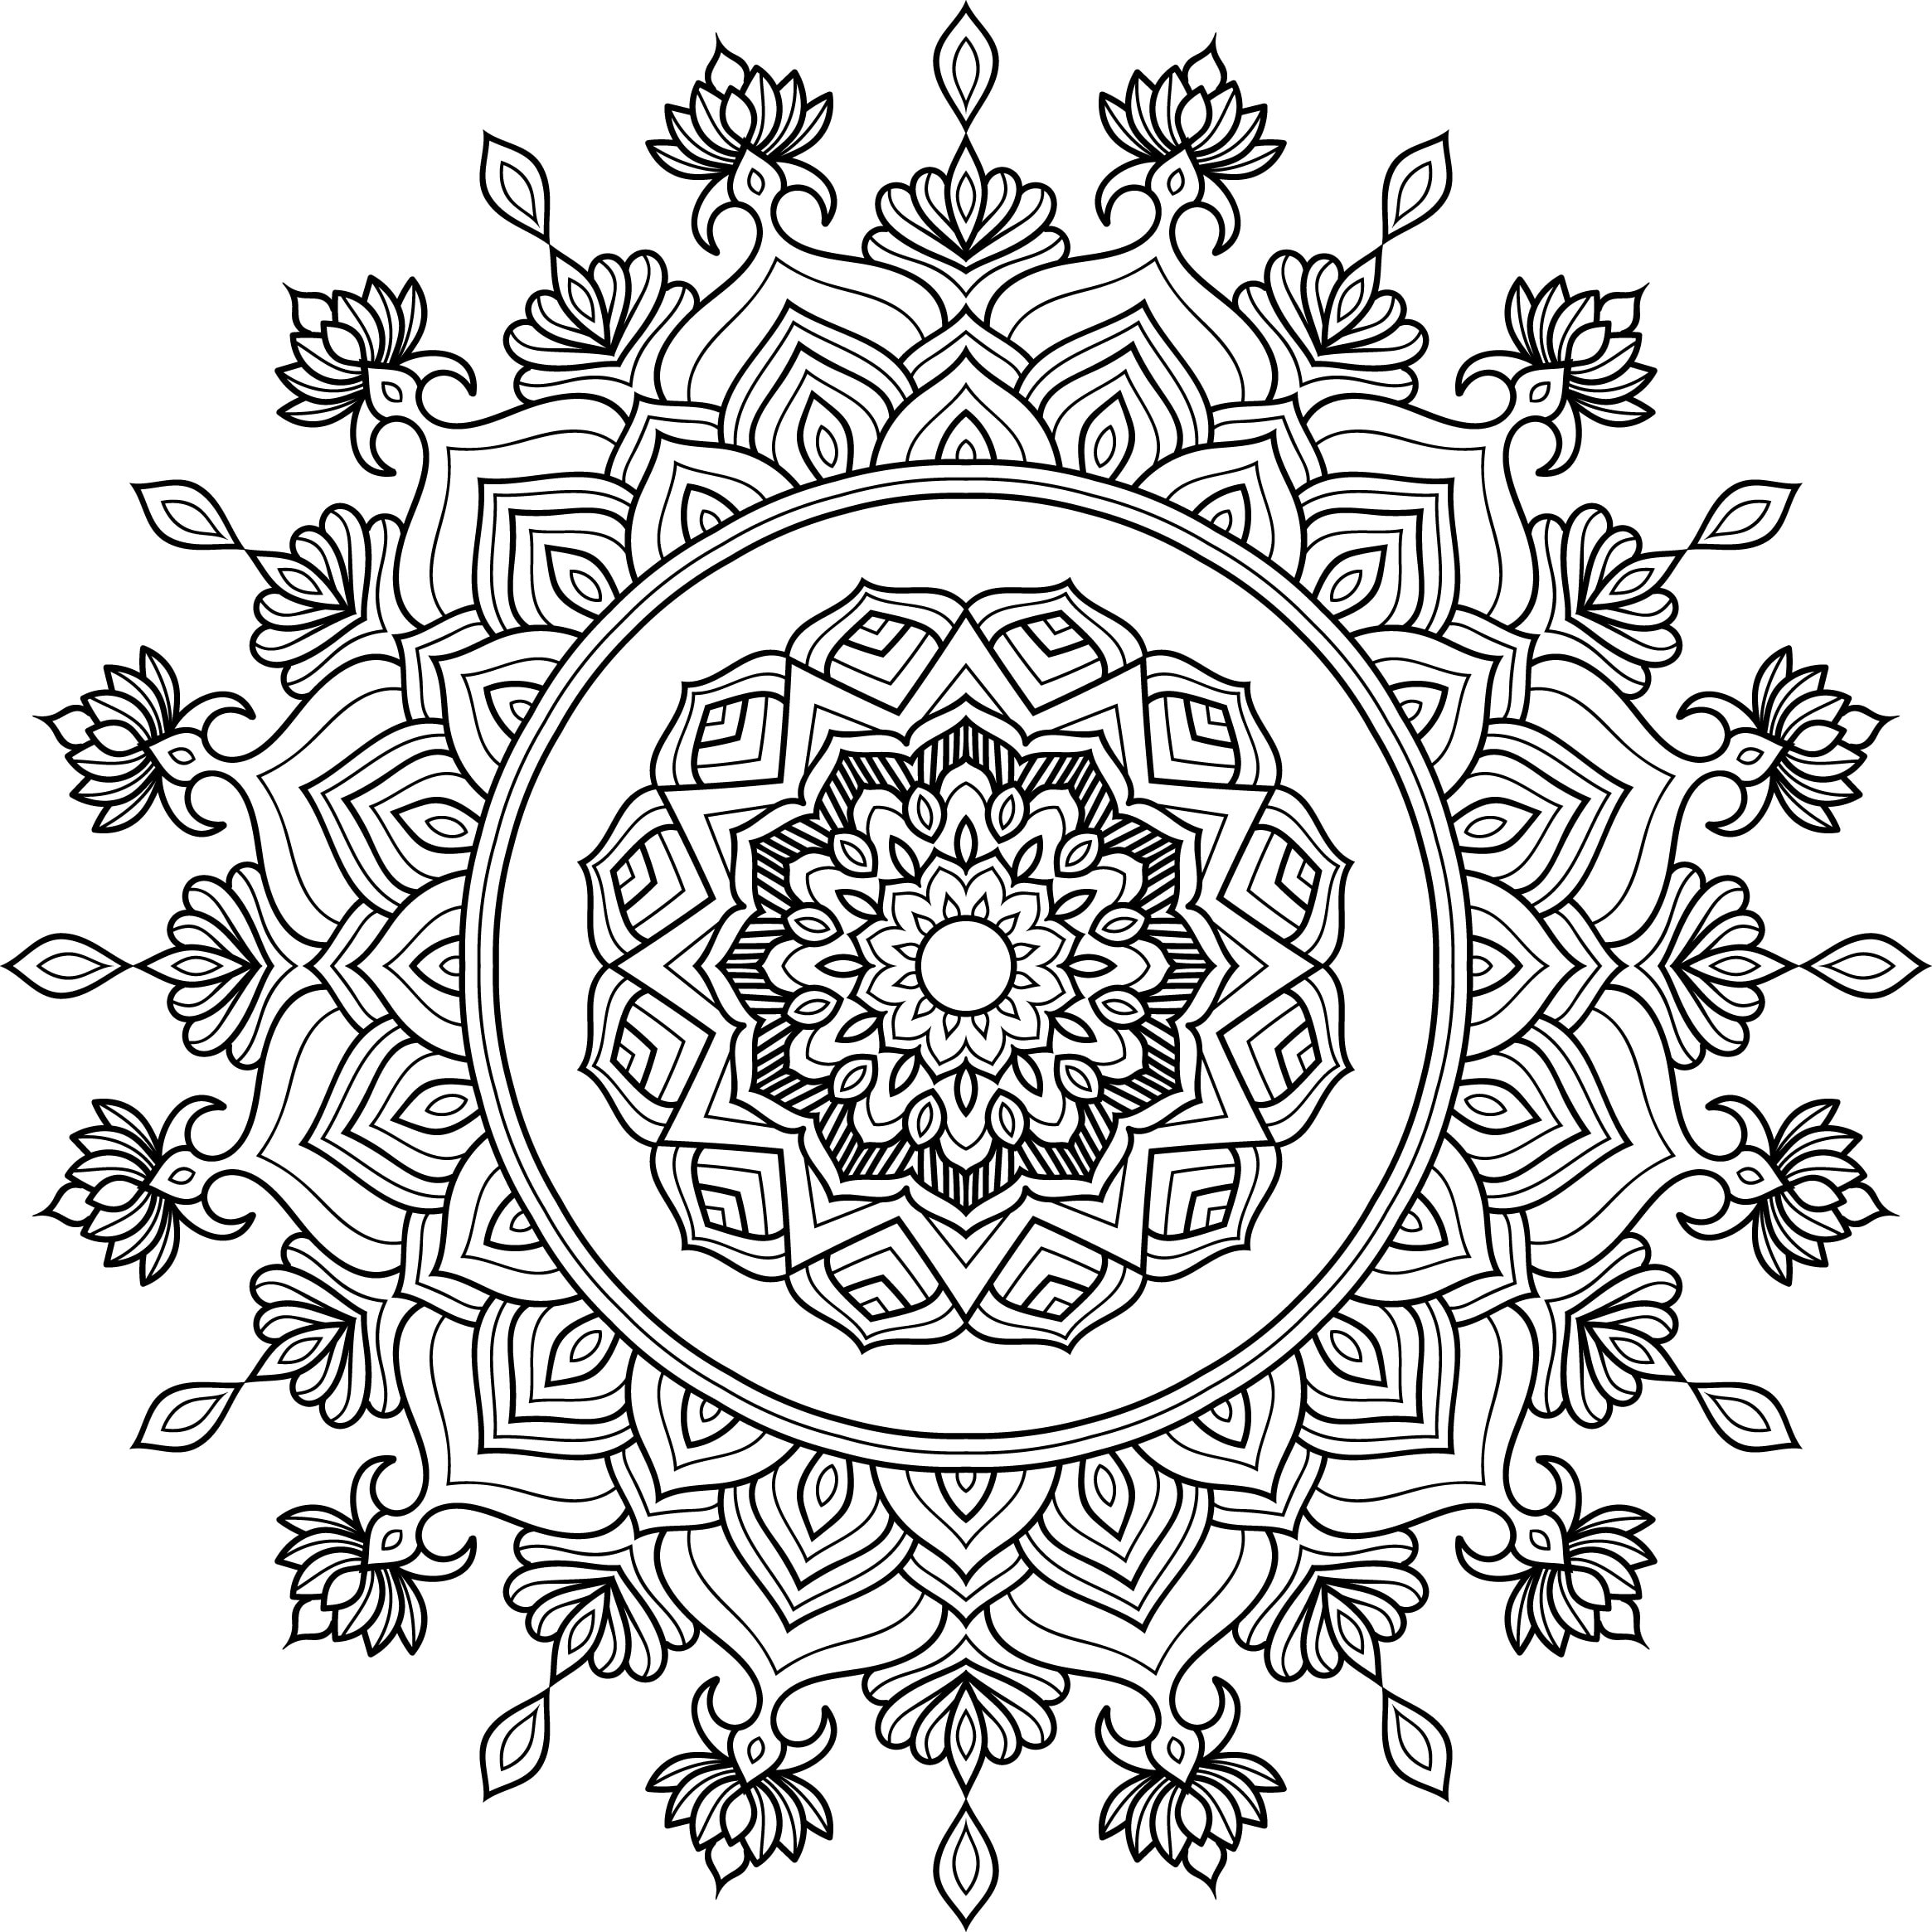 Bulk Adult Mandala Coloring Page for KDP Graphic by zohuraakter524